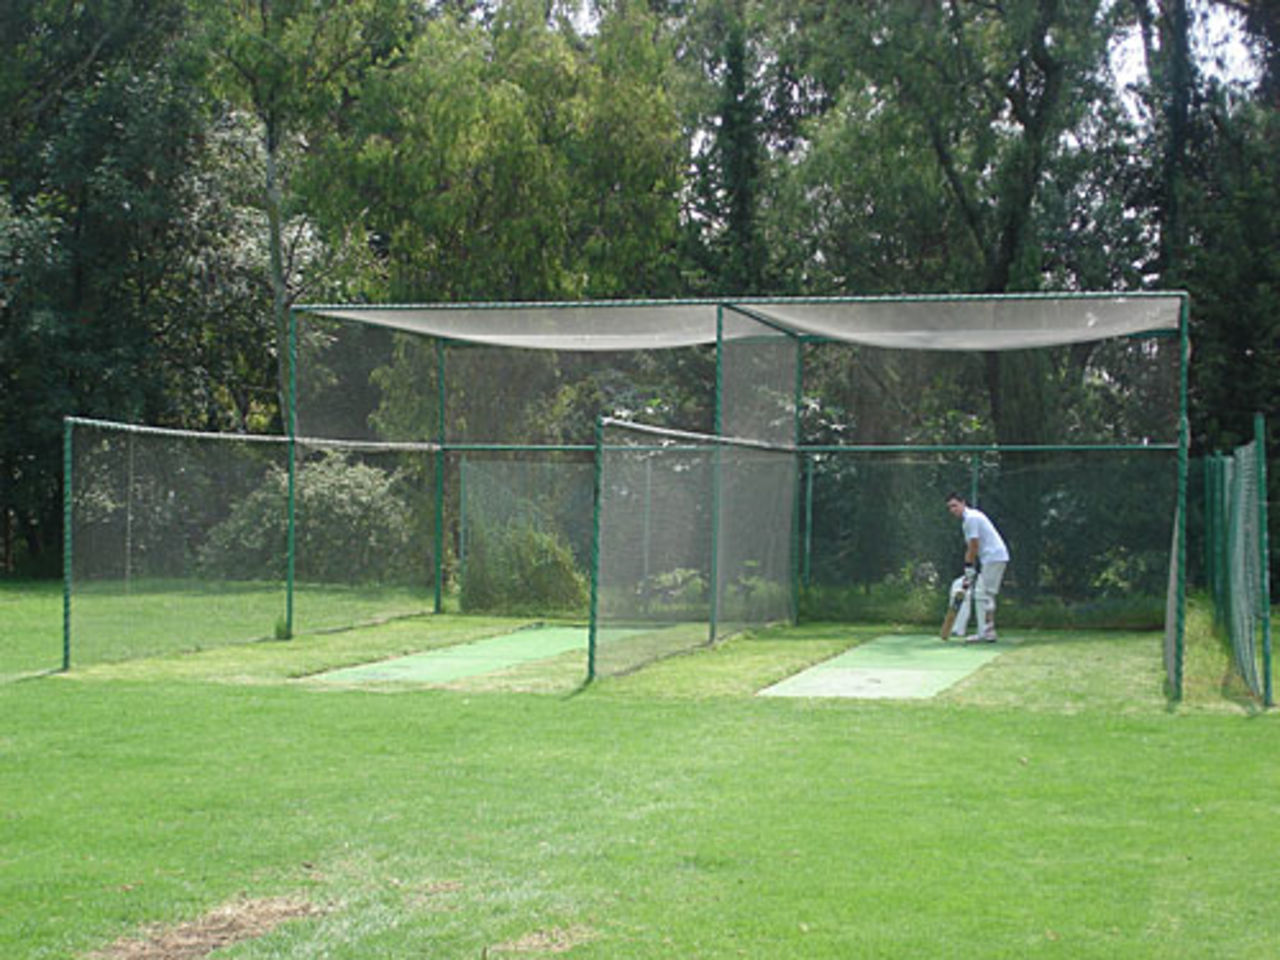 Nets at the Reforma Club, Mexico City, September 21, 2008